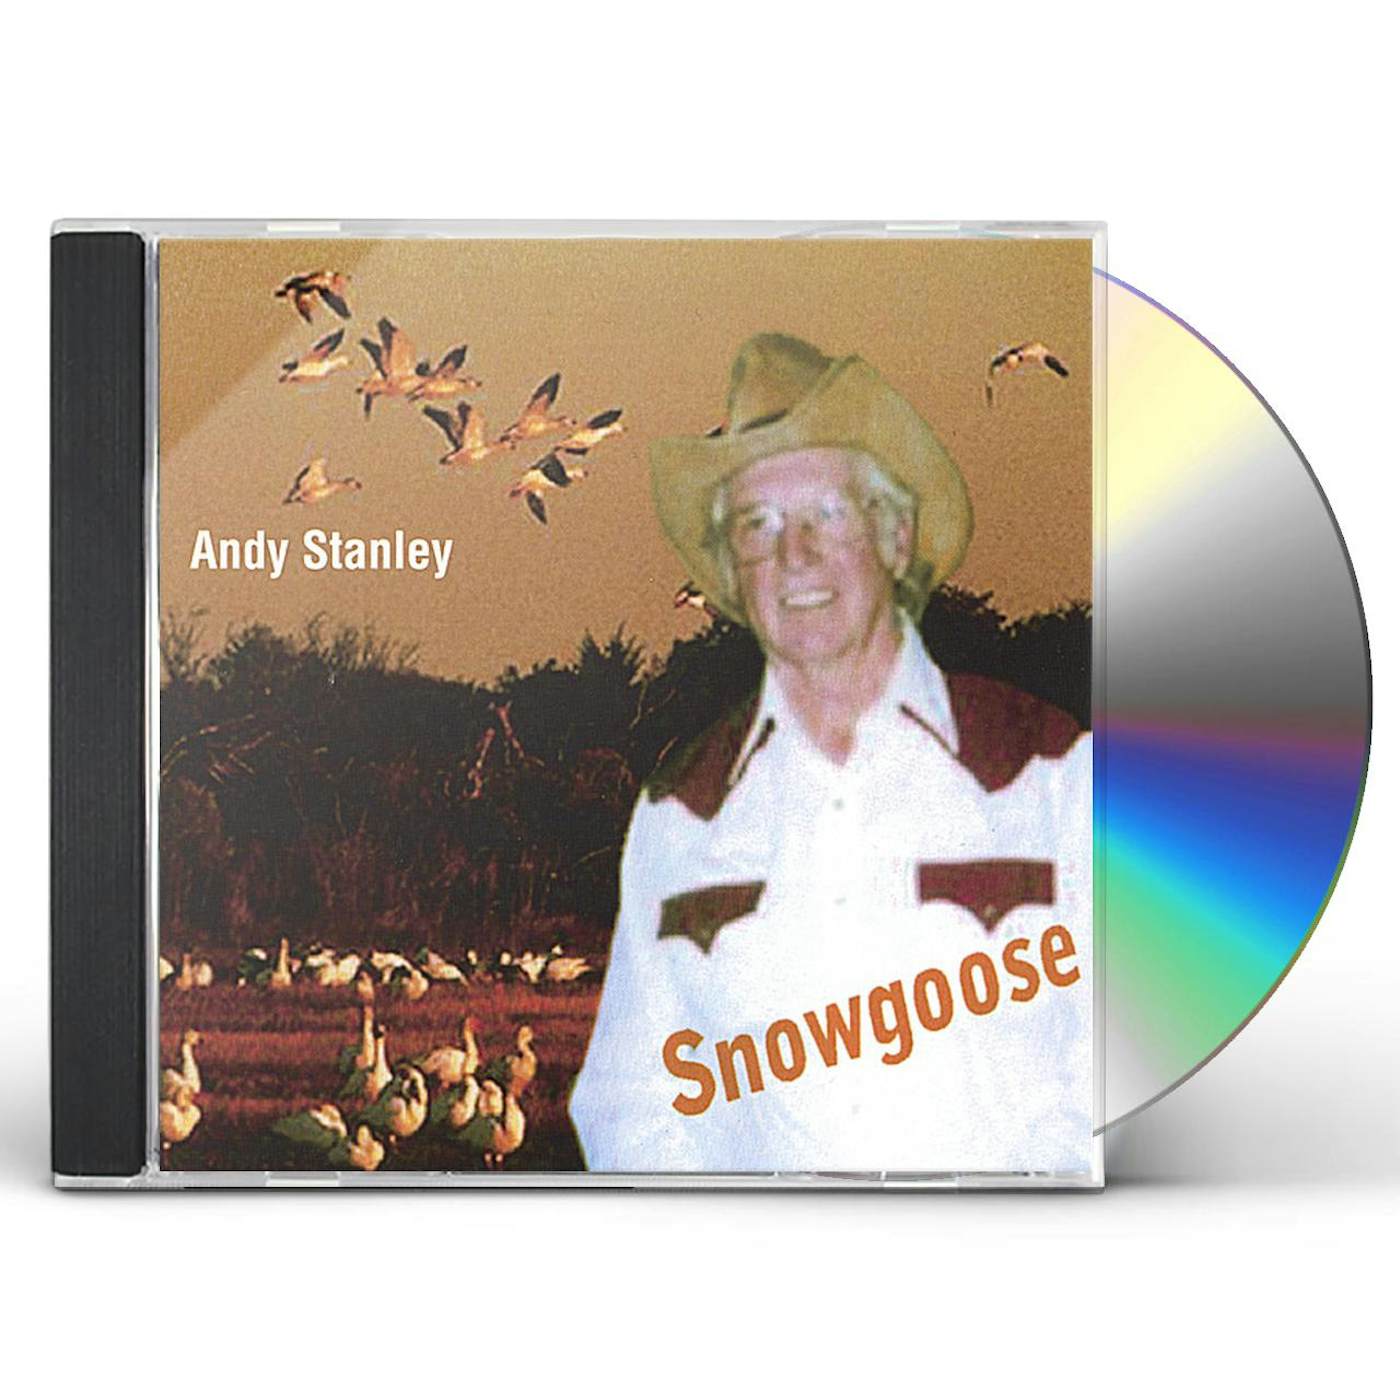 Andy Stanley SNOWGOOSE CD